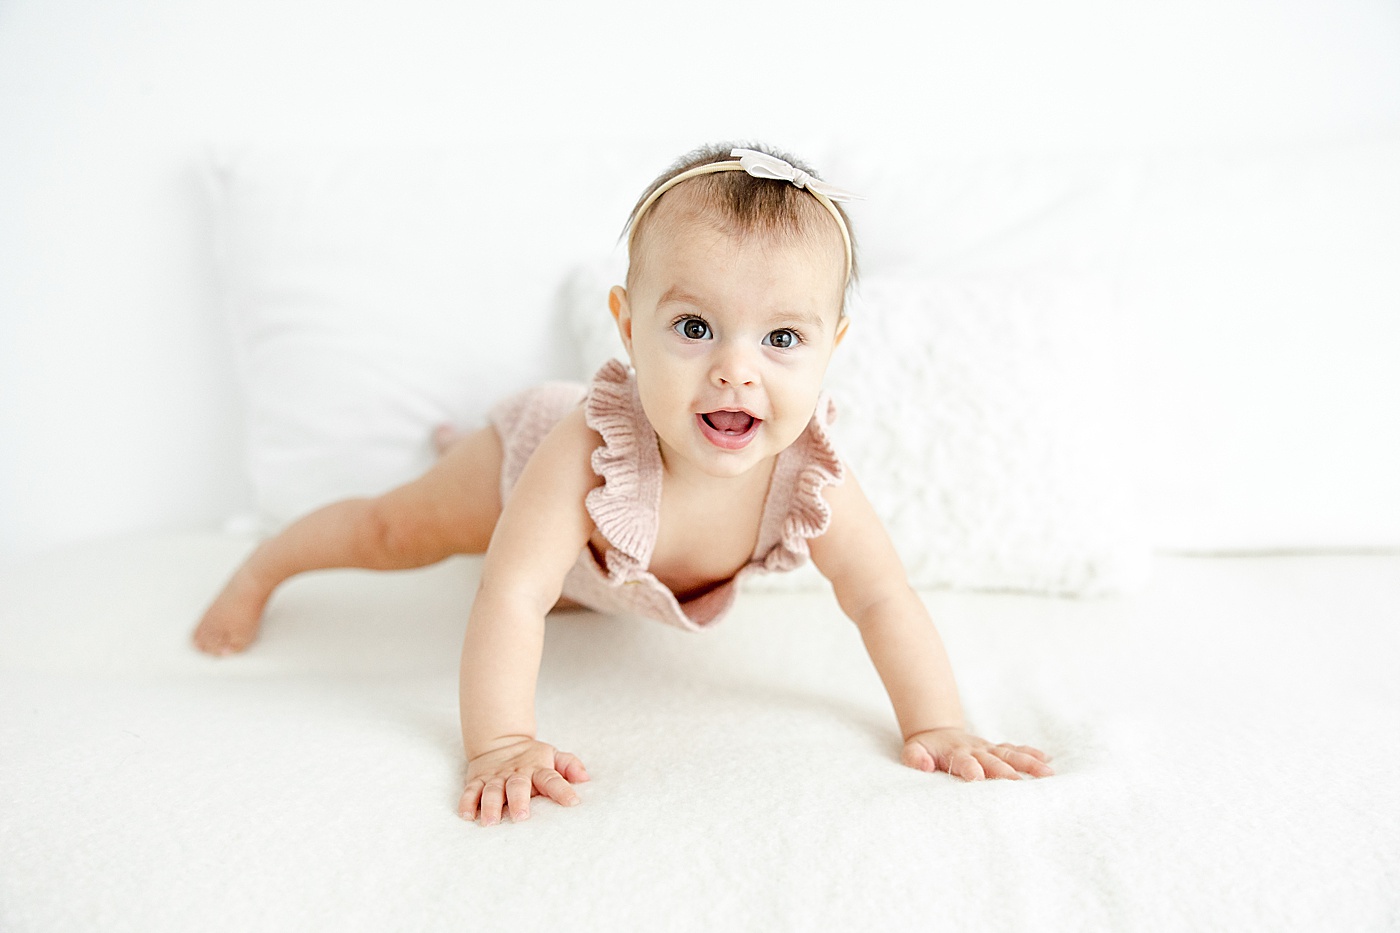 8 month old pushing up on bed during milestone photoshoot with Kristin Wood Photography.